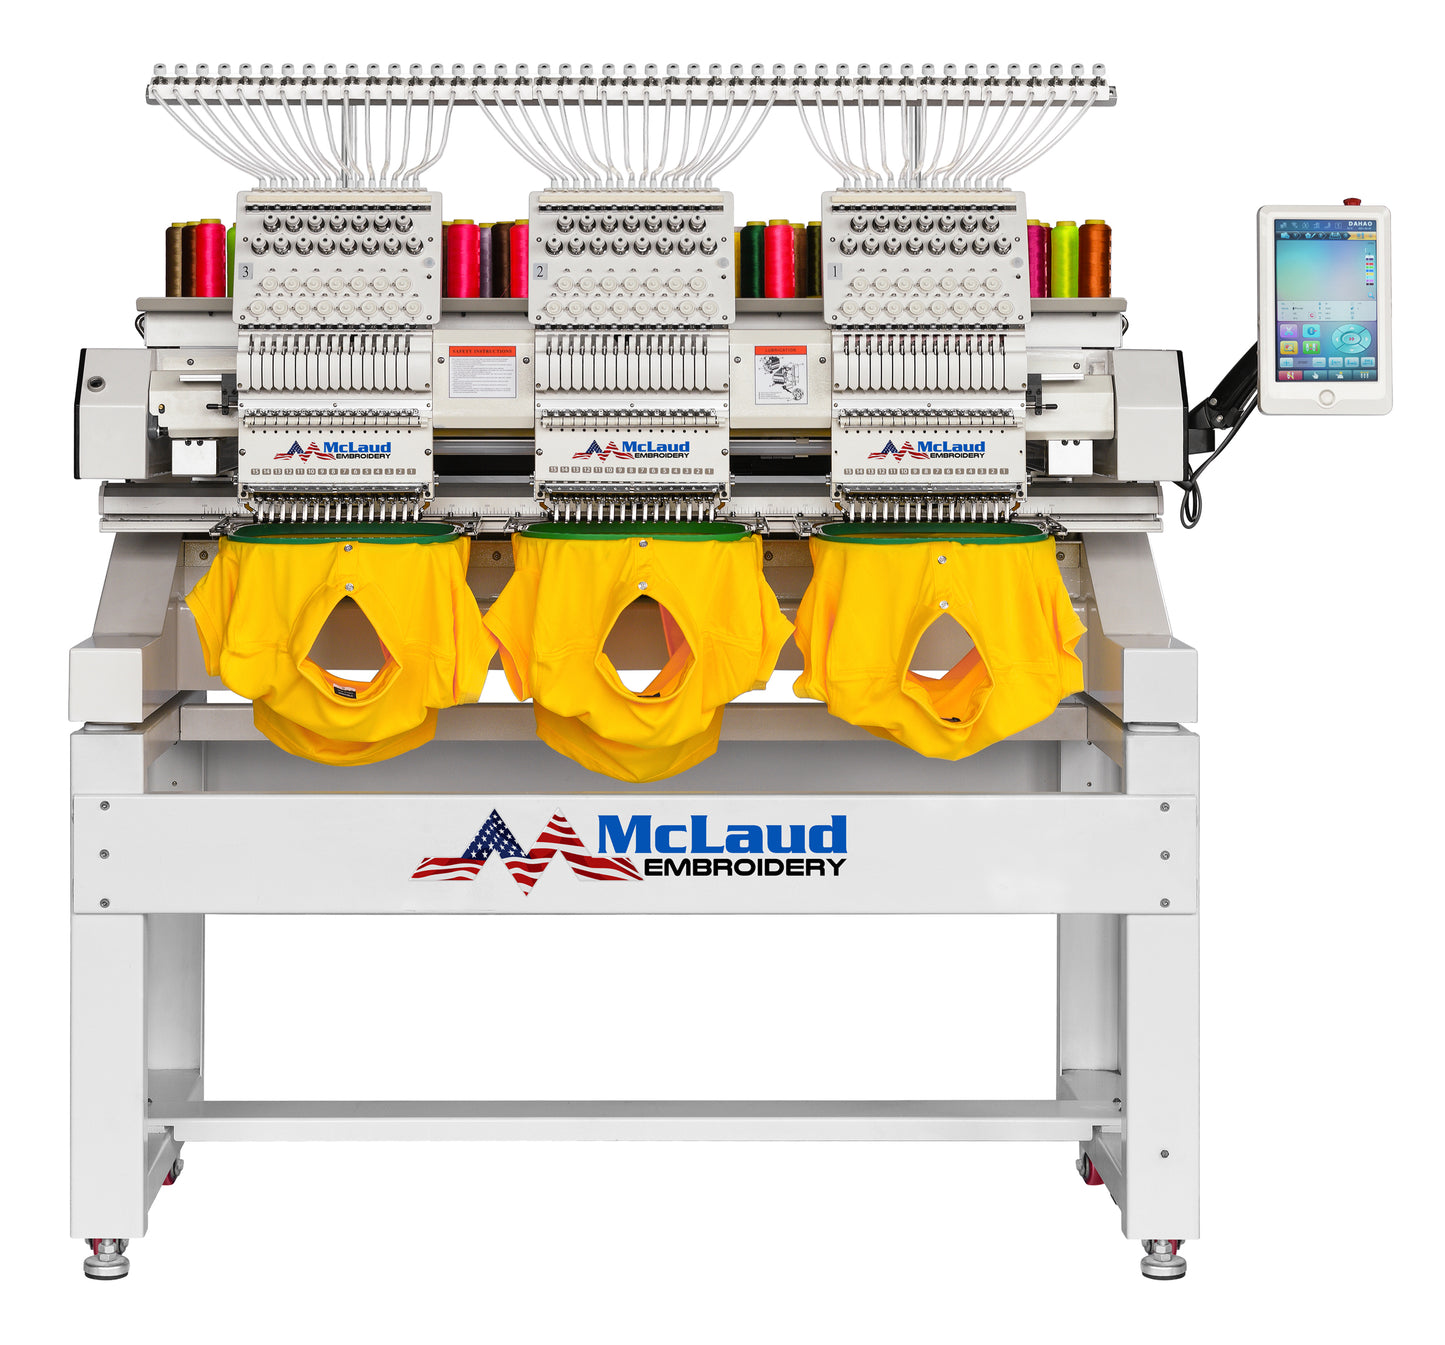 McLaud MD315-16x16 Embroidery Machine, 3 Head, 15 needles, 1200spm, Free Shipping in USA